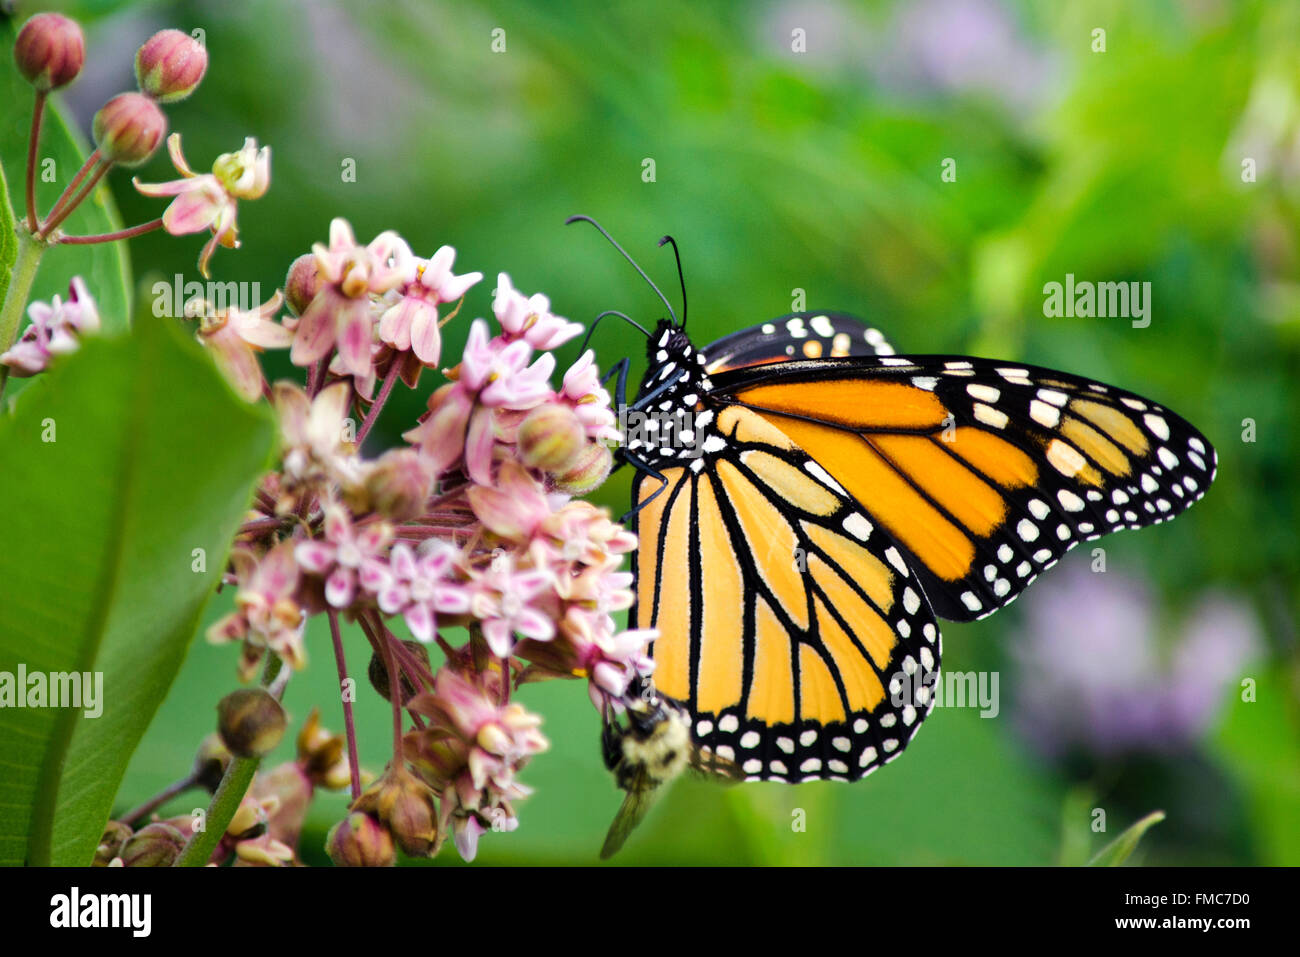 Monarch butterfly with wings closed feeding on milkweed flowers in summer garden. Stock Photo